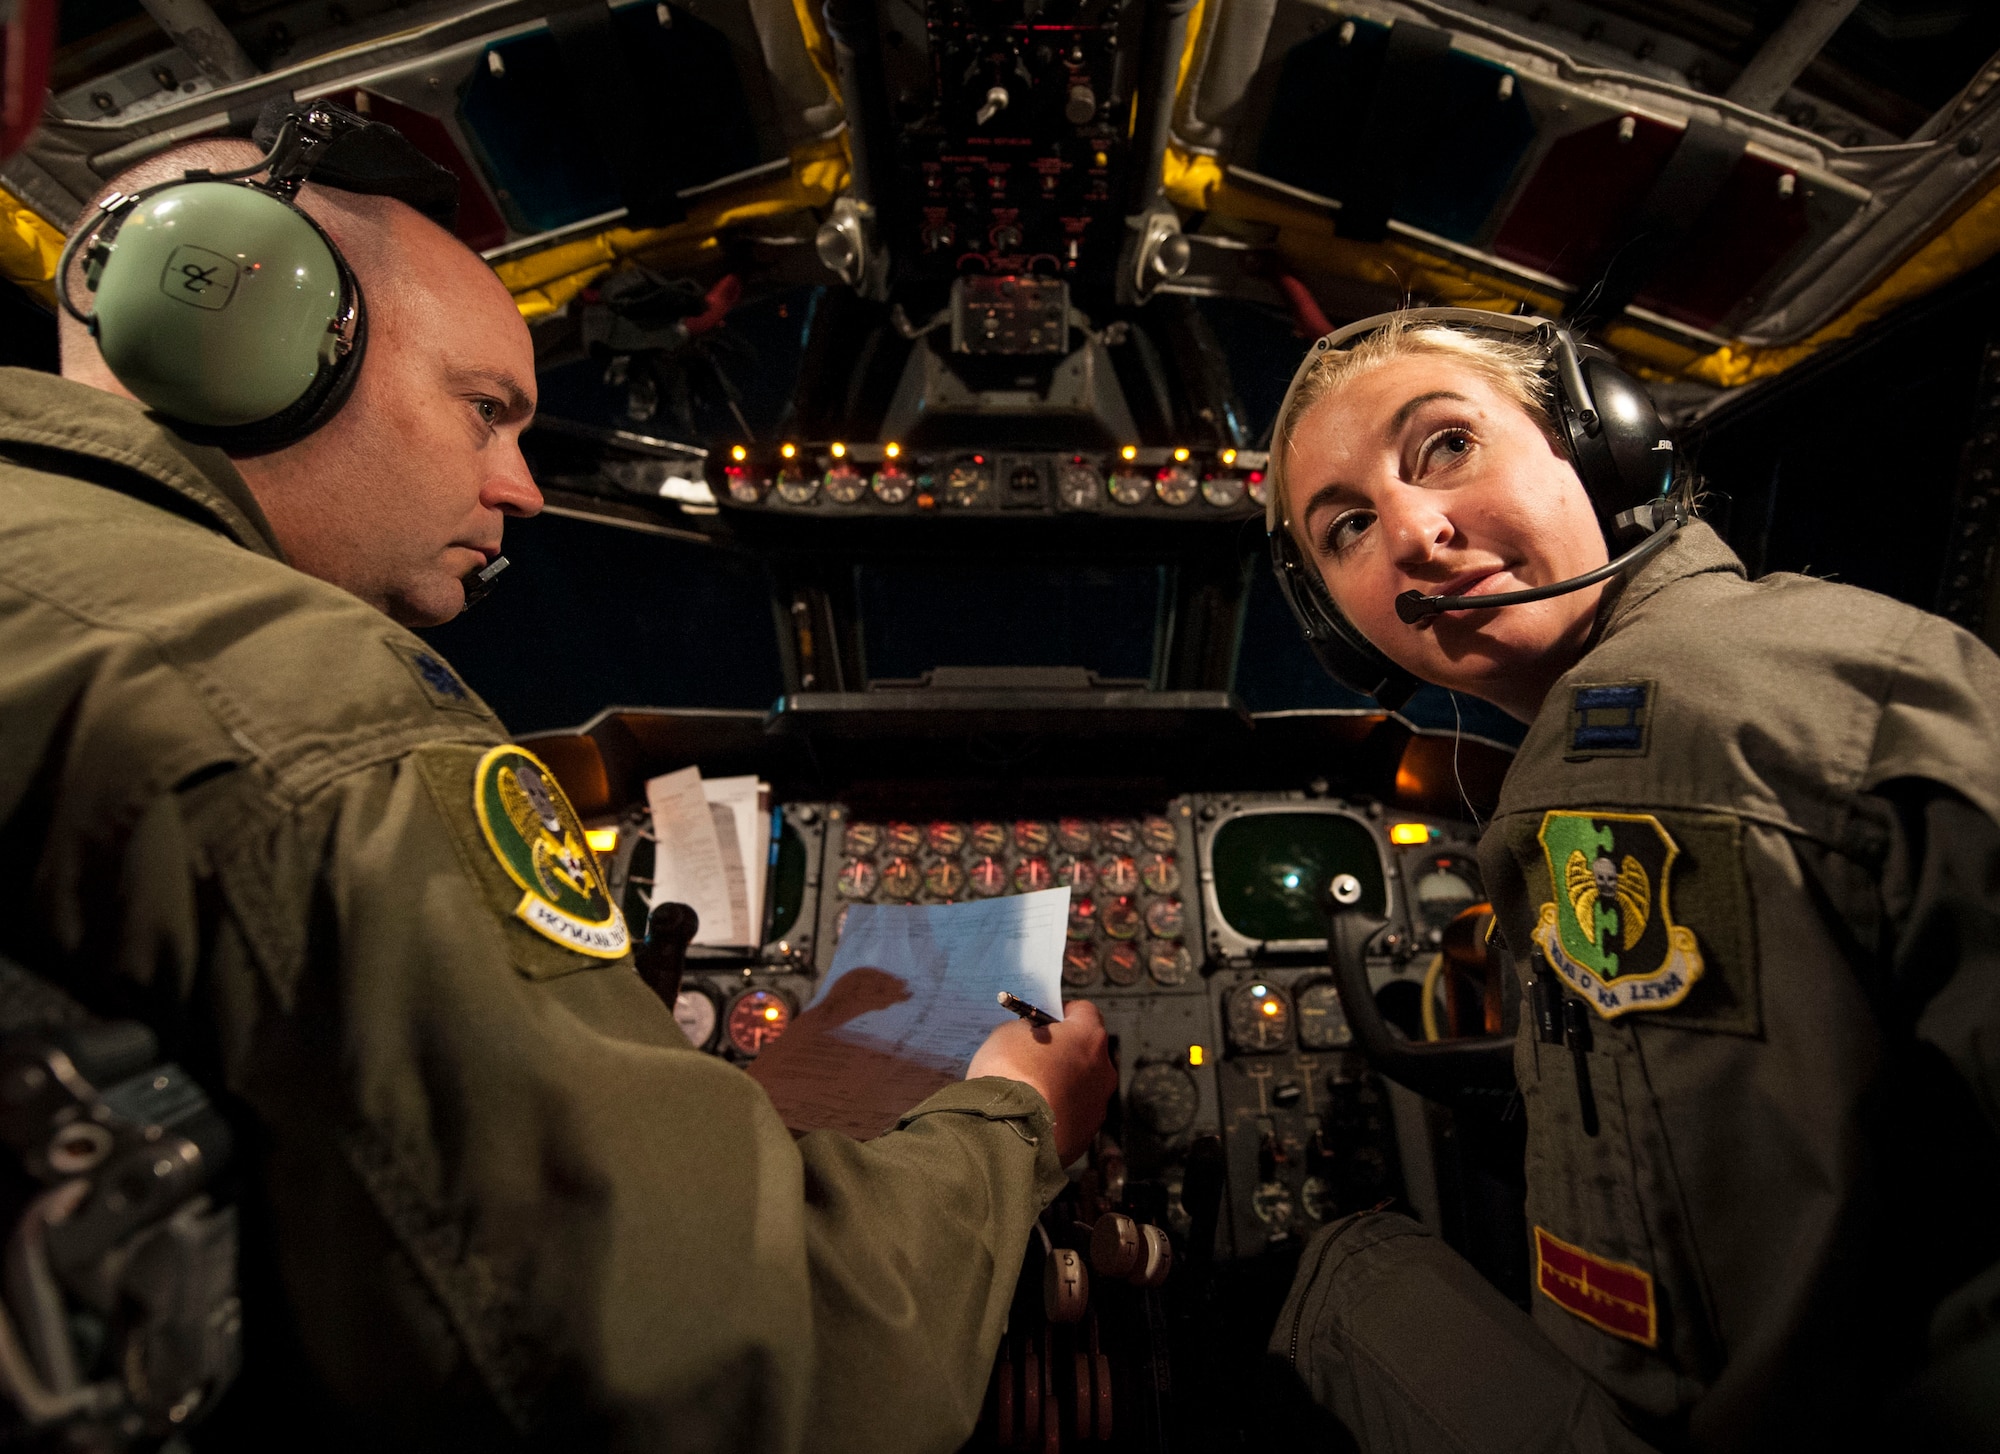 Lt. Col. Monte Wiley, 69th Bomb Squadron pilot (left), completes pre-flight
check as Capt. Kristin Nelson, 23rd BS pilot (right), listens to input from
other crew members inside their B-52H Stratofortress at Minot Air Force
Base, N.D., July 9, 2015. Wiley and Nelson piloted one of two B-52H
Stratofortresses participating in a 16-hour mission to support an air show
in Rio Negro, Colombia. (U.S. Air Force photo/Senior Airman Stephanie
Morris)
